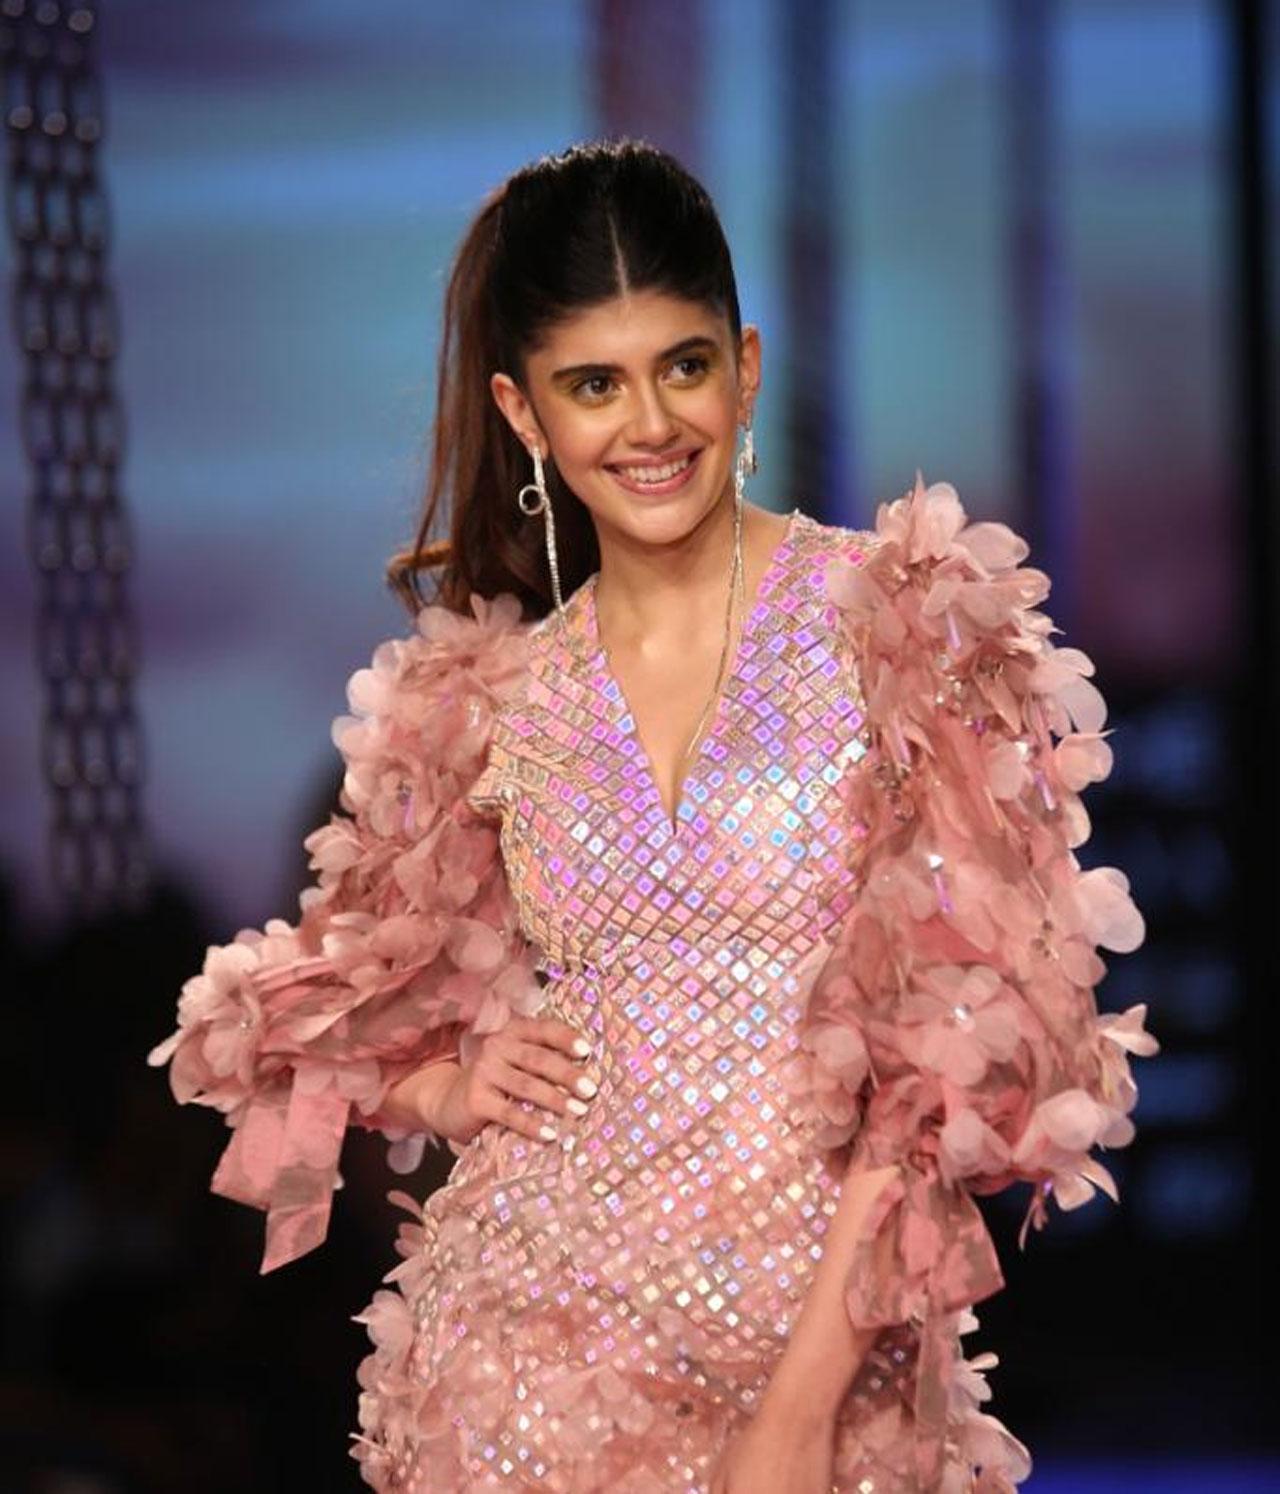 'Dil Bechara' actress Sanjana Sanghi won each and every heart with her winning smile at the ramp. She was the show-stopper who walked for designers Pankaj and Nidhi. 